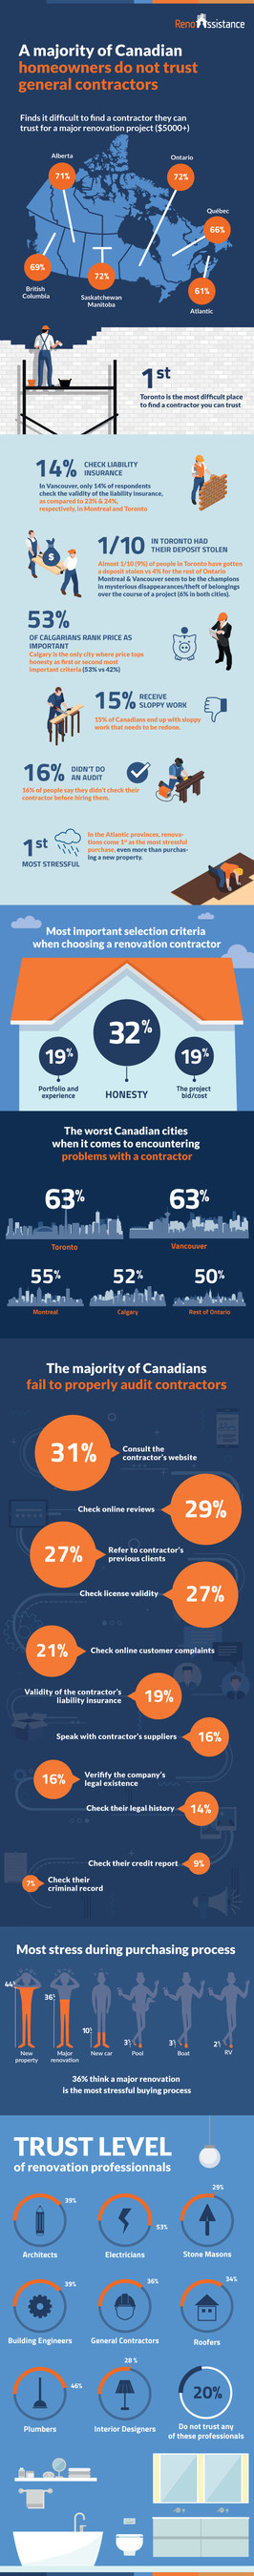 National Ipsos Survey on Renovation - 7 in 10 Canadians Have Difficulty Finding a Contractor They Can Trust